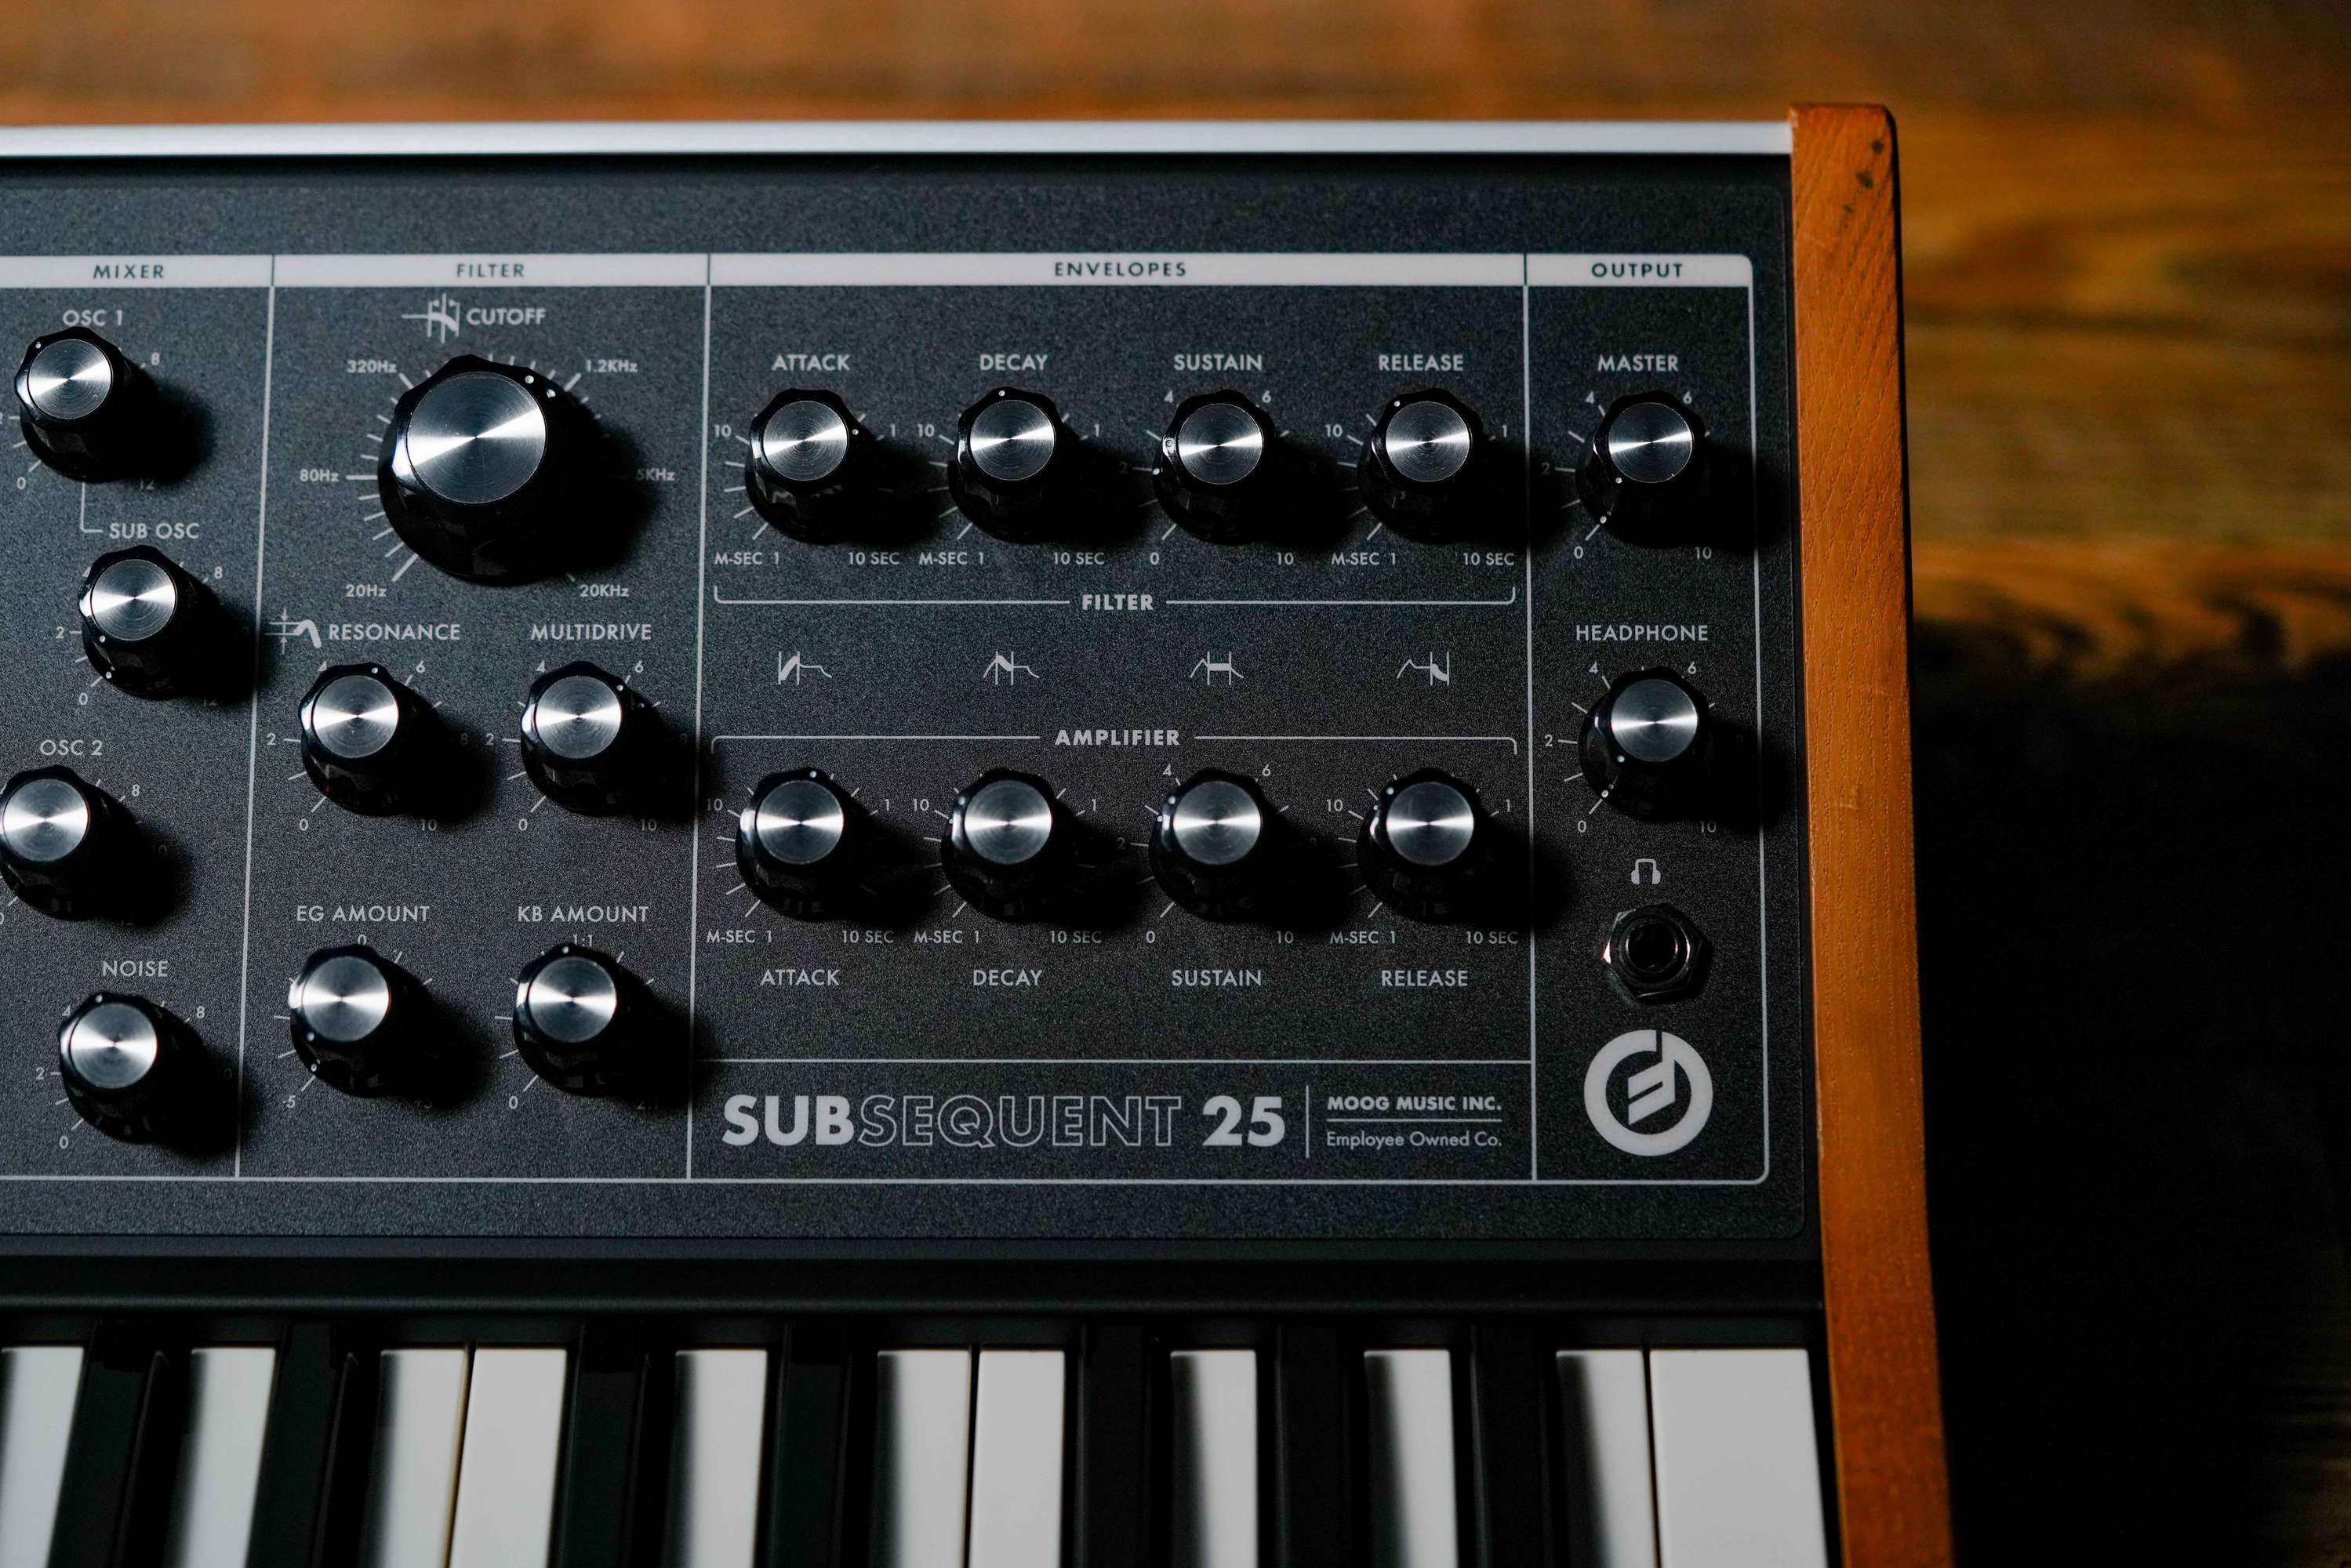 Subsequent 25 – moog